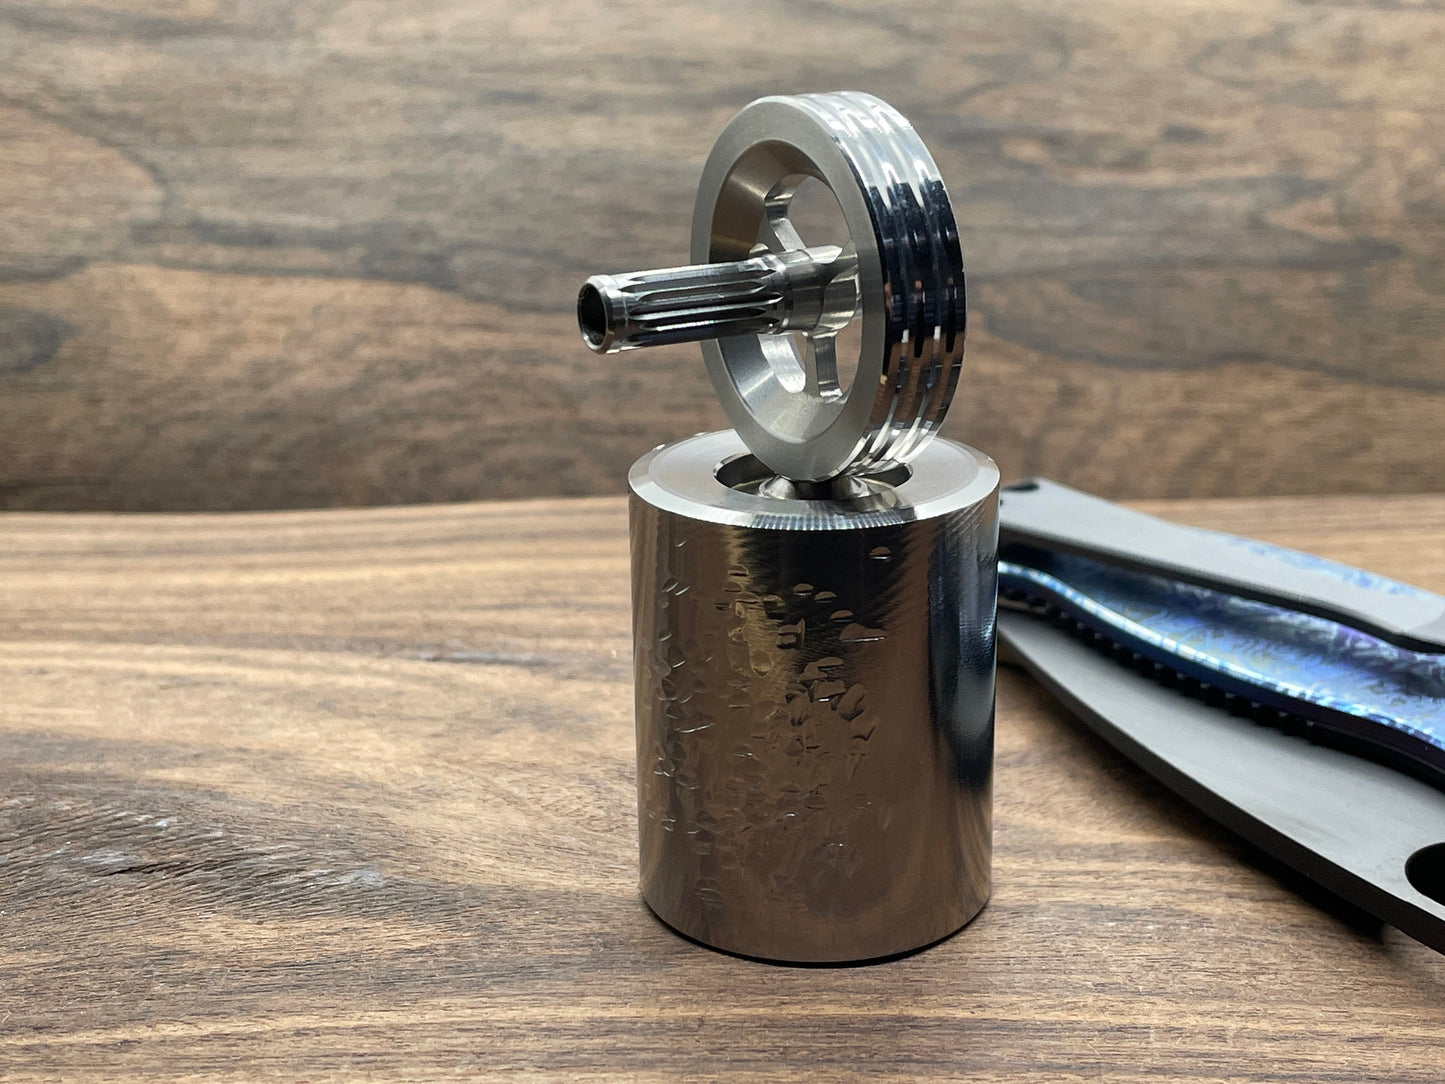 Hammered Stainless Steel Mega Spin station for your EDC Spinning Tops & Spinning Coins Display them in style or as a Worry Coin MetonBoss